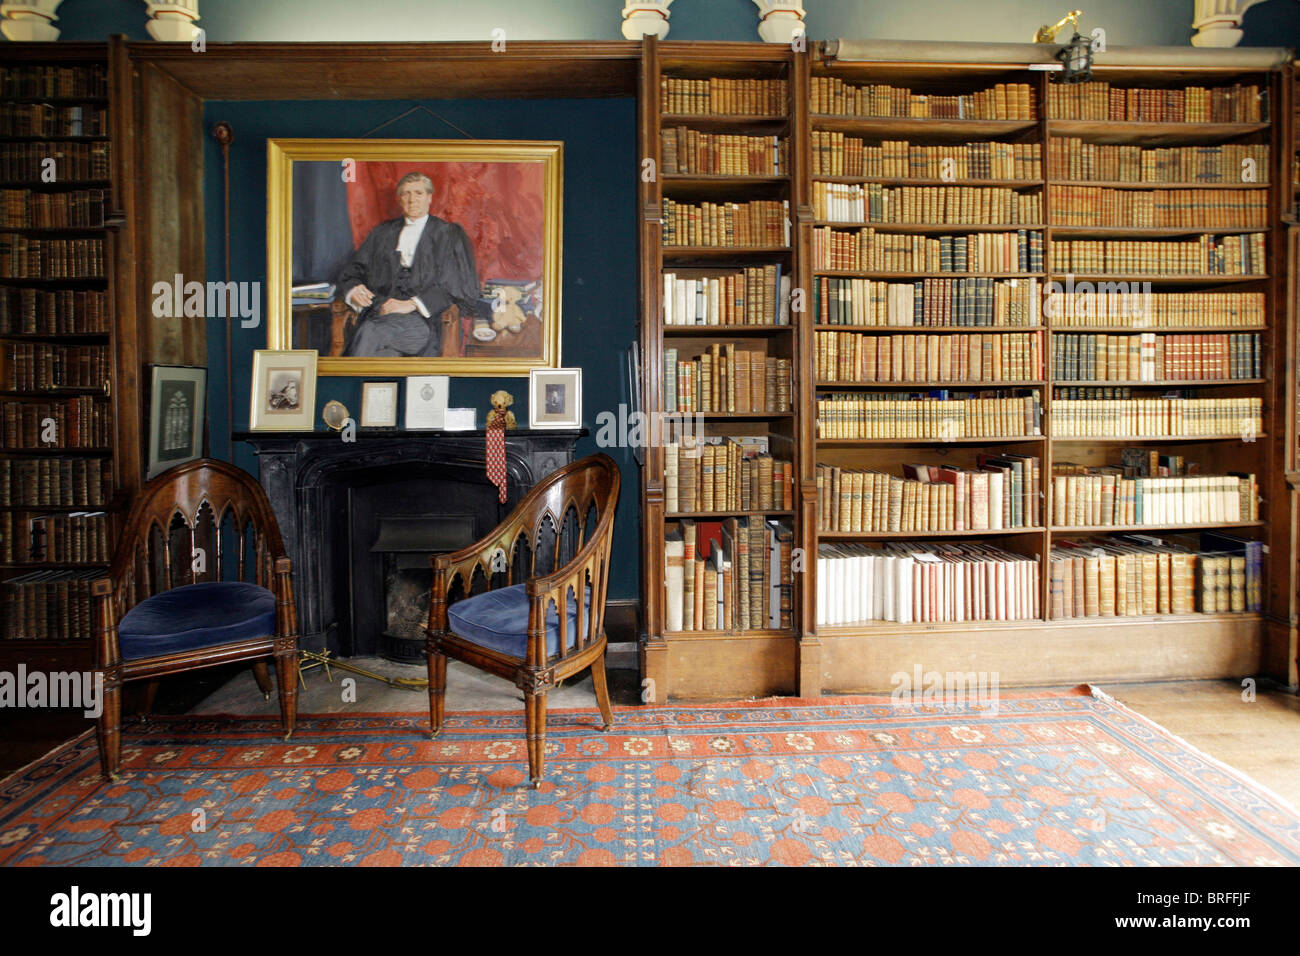 Library, Prideaux Place Manor, Padstow, Cornwall, South England, Great Britain, Europe Stock Photo